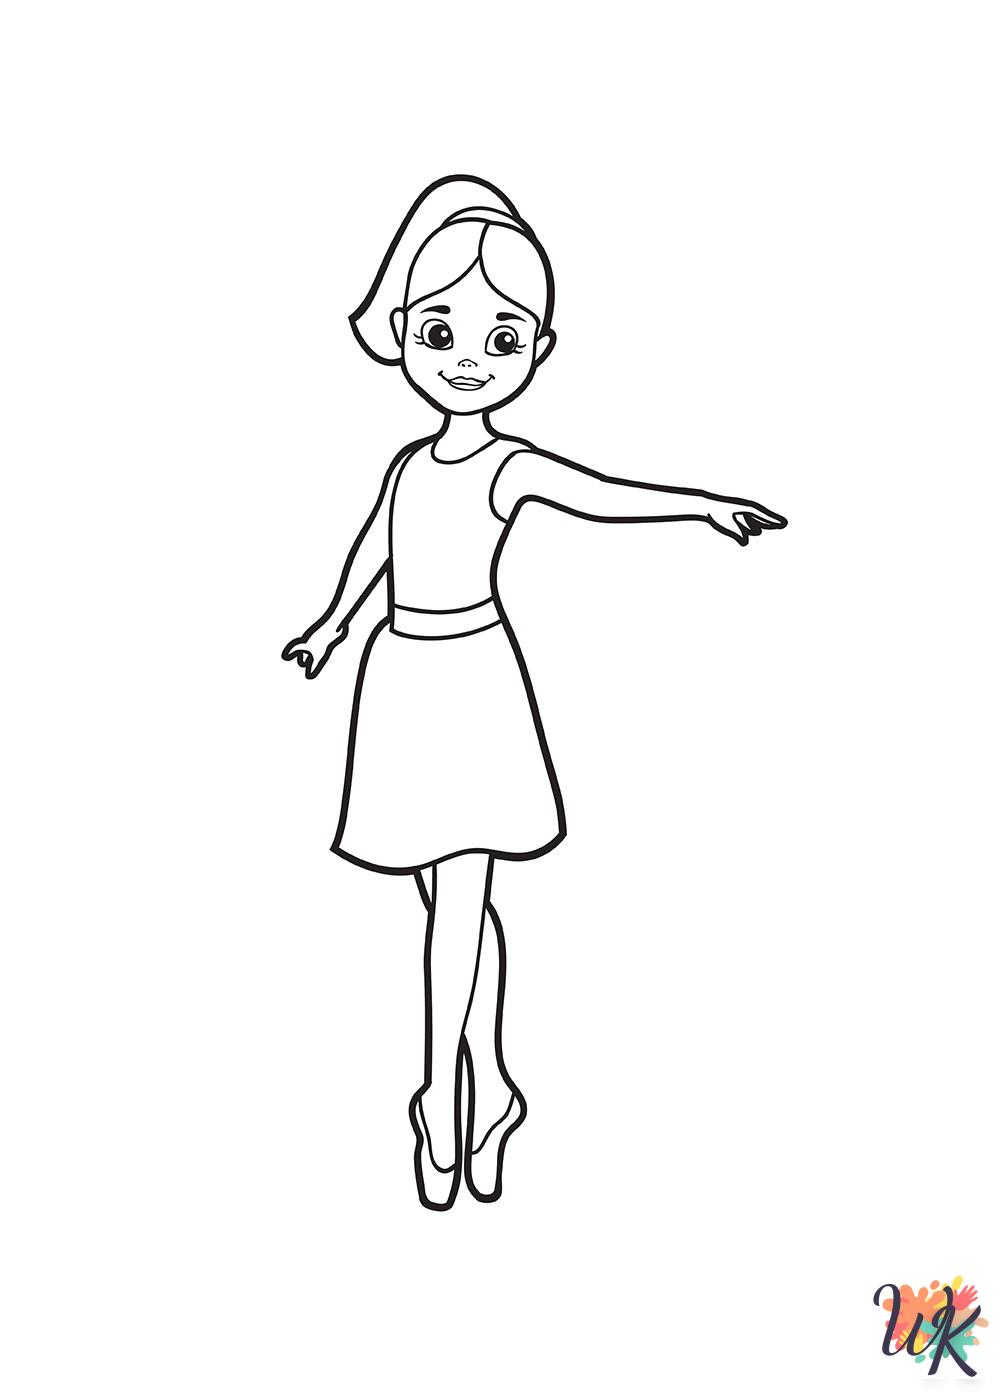 Ballerina Coloring Pages 8